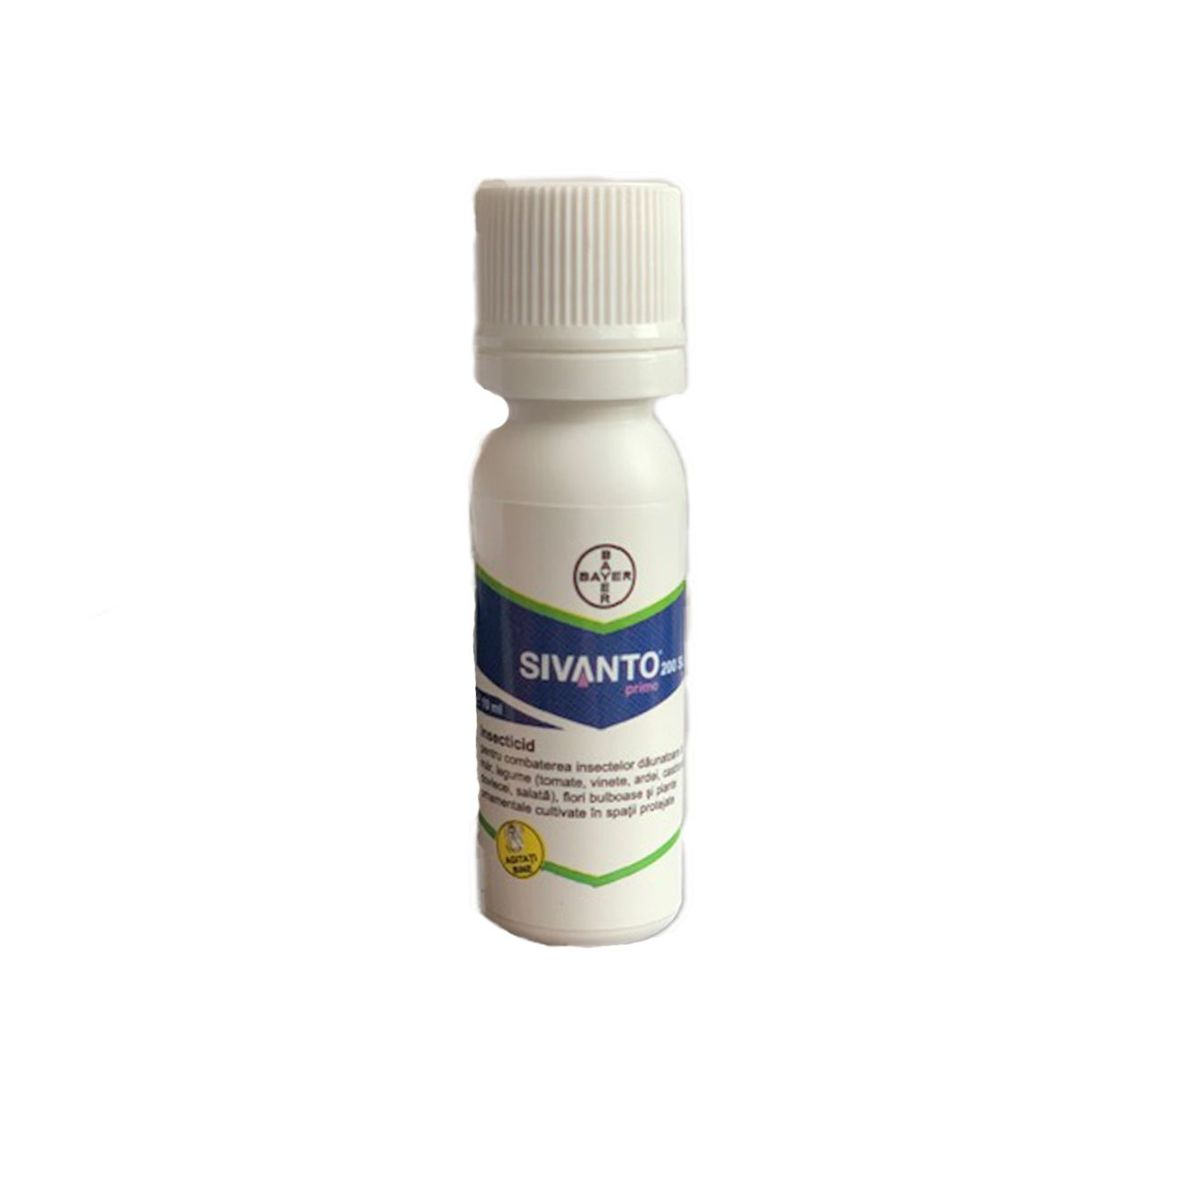 Insecticide - Insecticid SIVANTO PRIME, 10 ml, BAYER, hectarul.ro